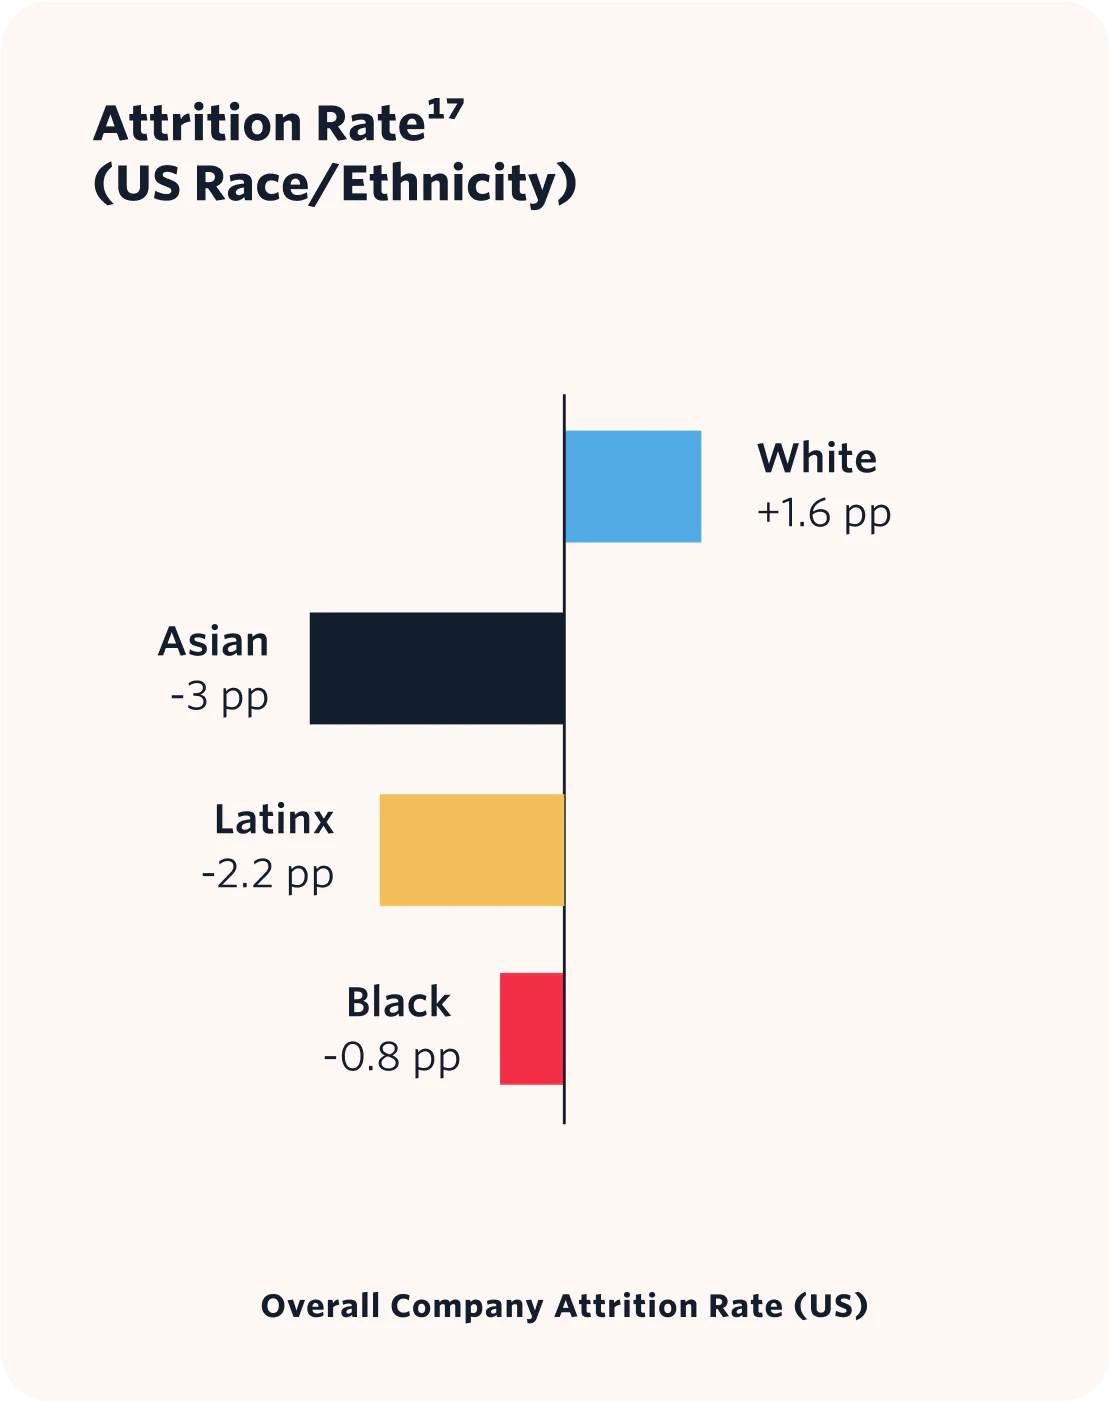 Attrition Rate (US Race/ Ethnicity) data represented in a bar chart.